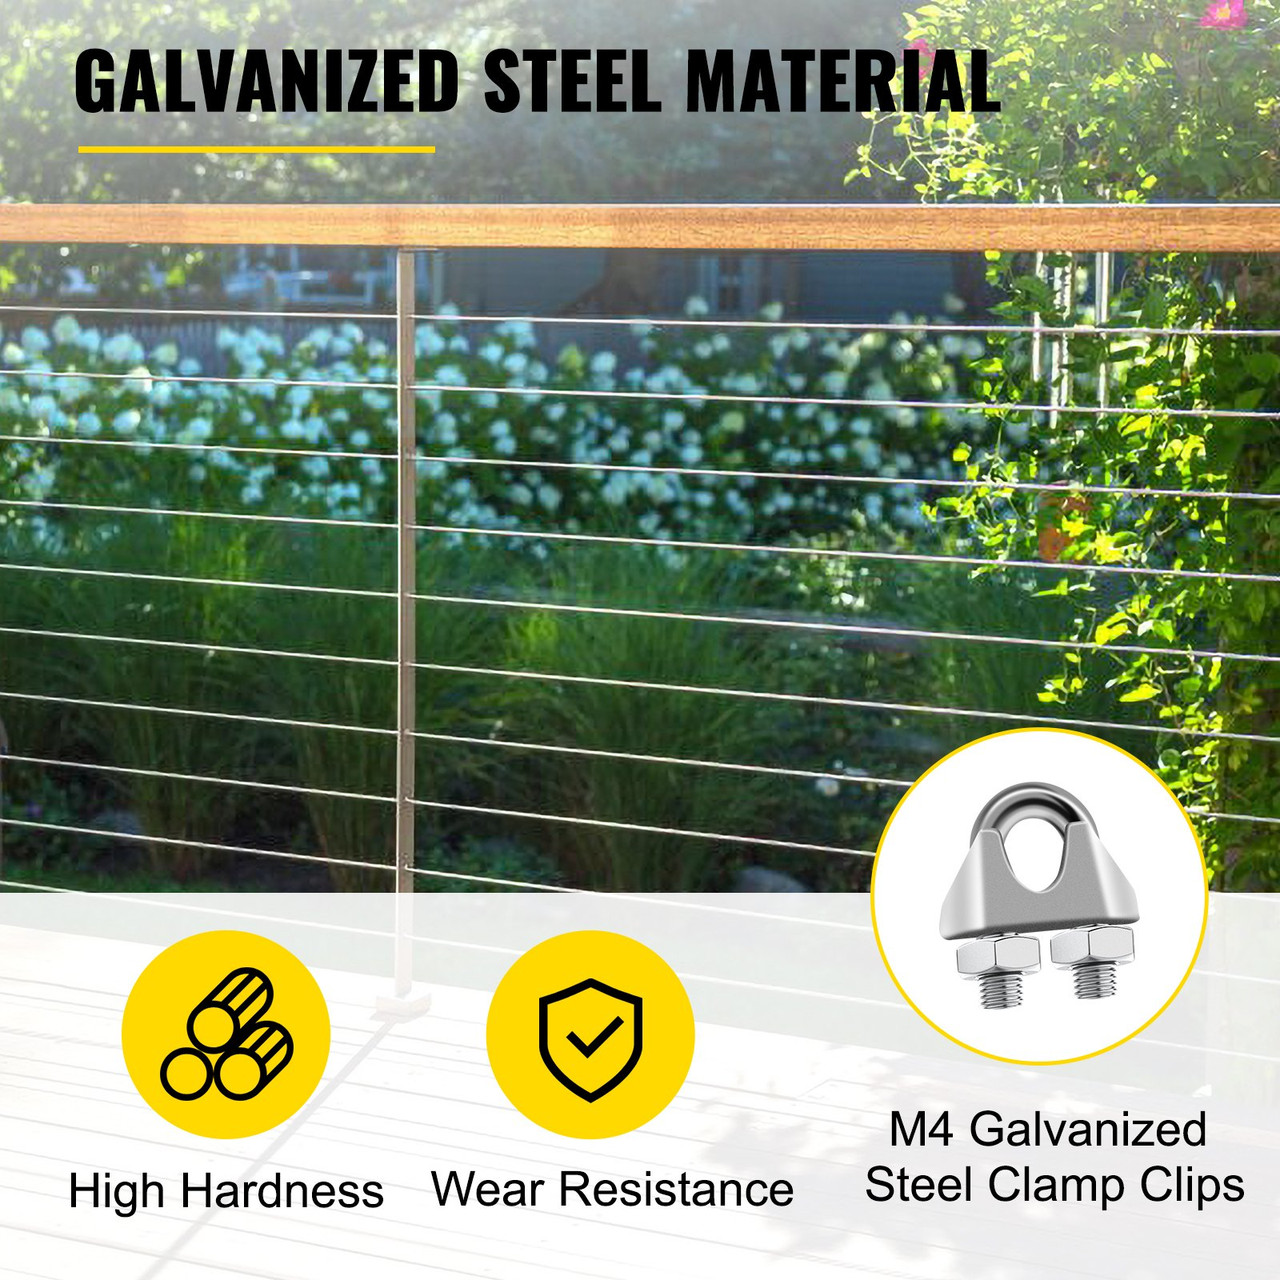 Galvanized Steel Cable, 3/16'' Aircraft Cable, 249ft Galvanized Cable 7x19 Construction Steel Wire Cable w/Cable Clamps, 4400lb Breaking Strength for Railing Decking, Lifting, Hanging, Fencing